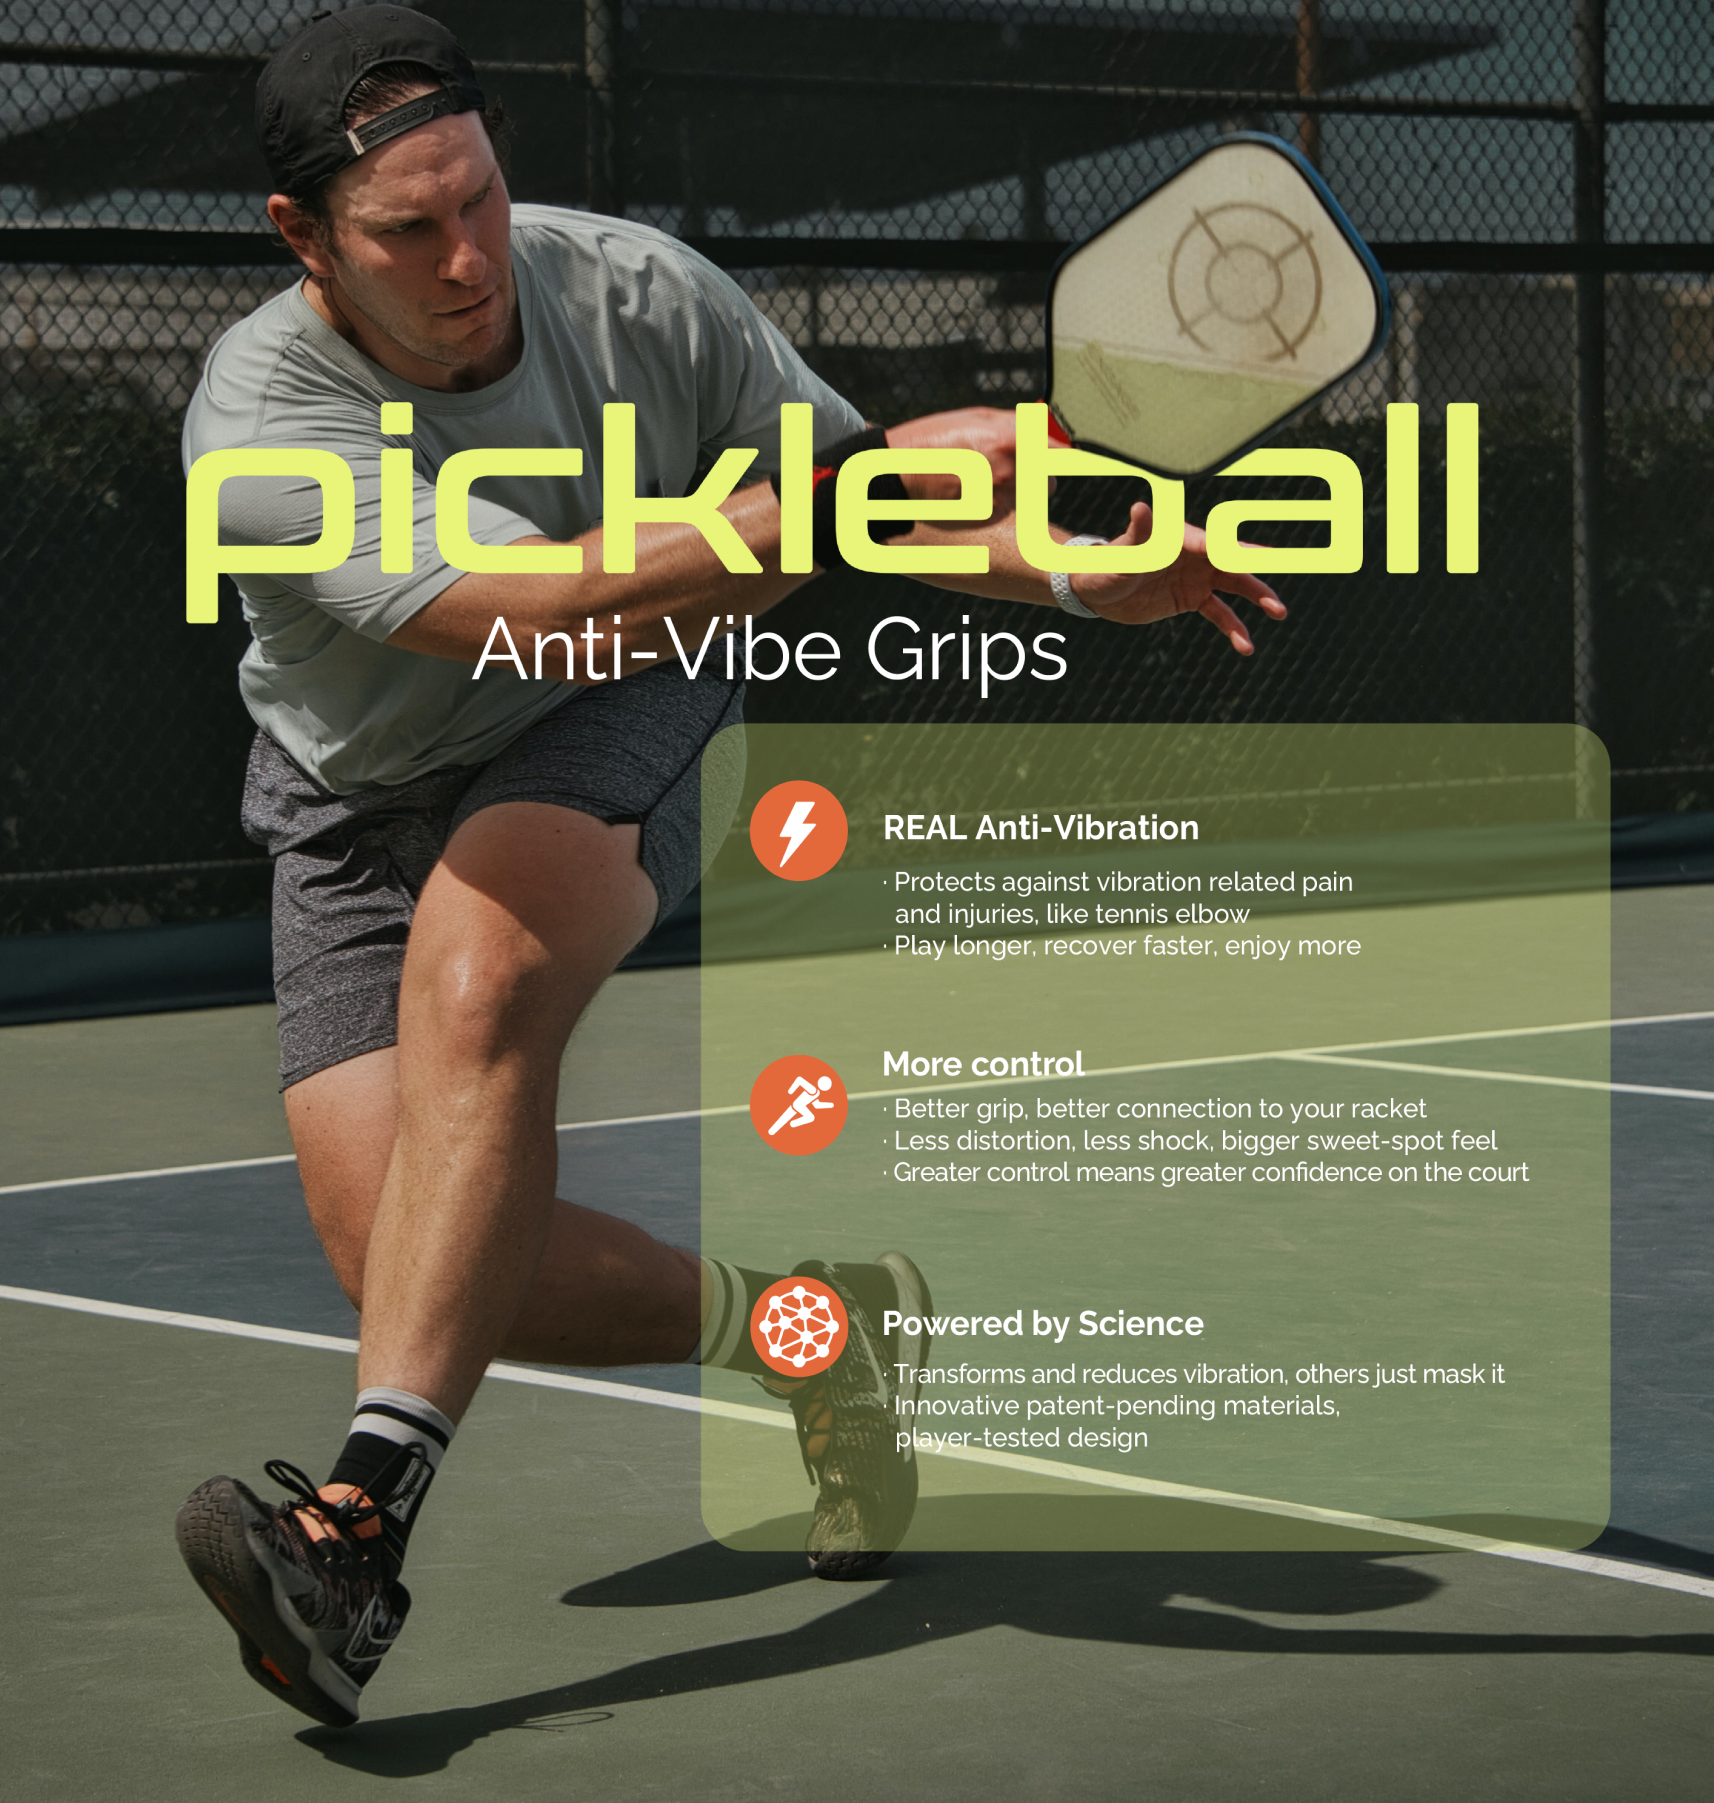 Introducing VT Advantec's new line of Anti-Vibe Products for Picklebal